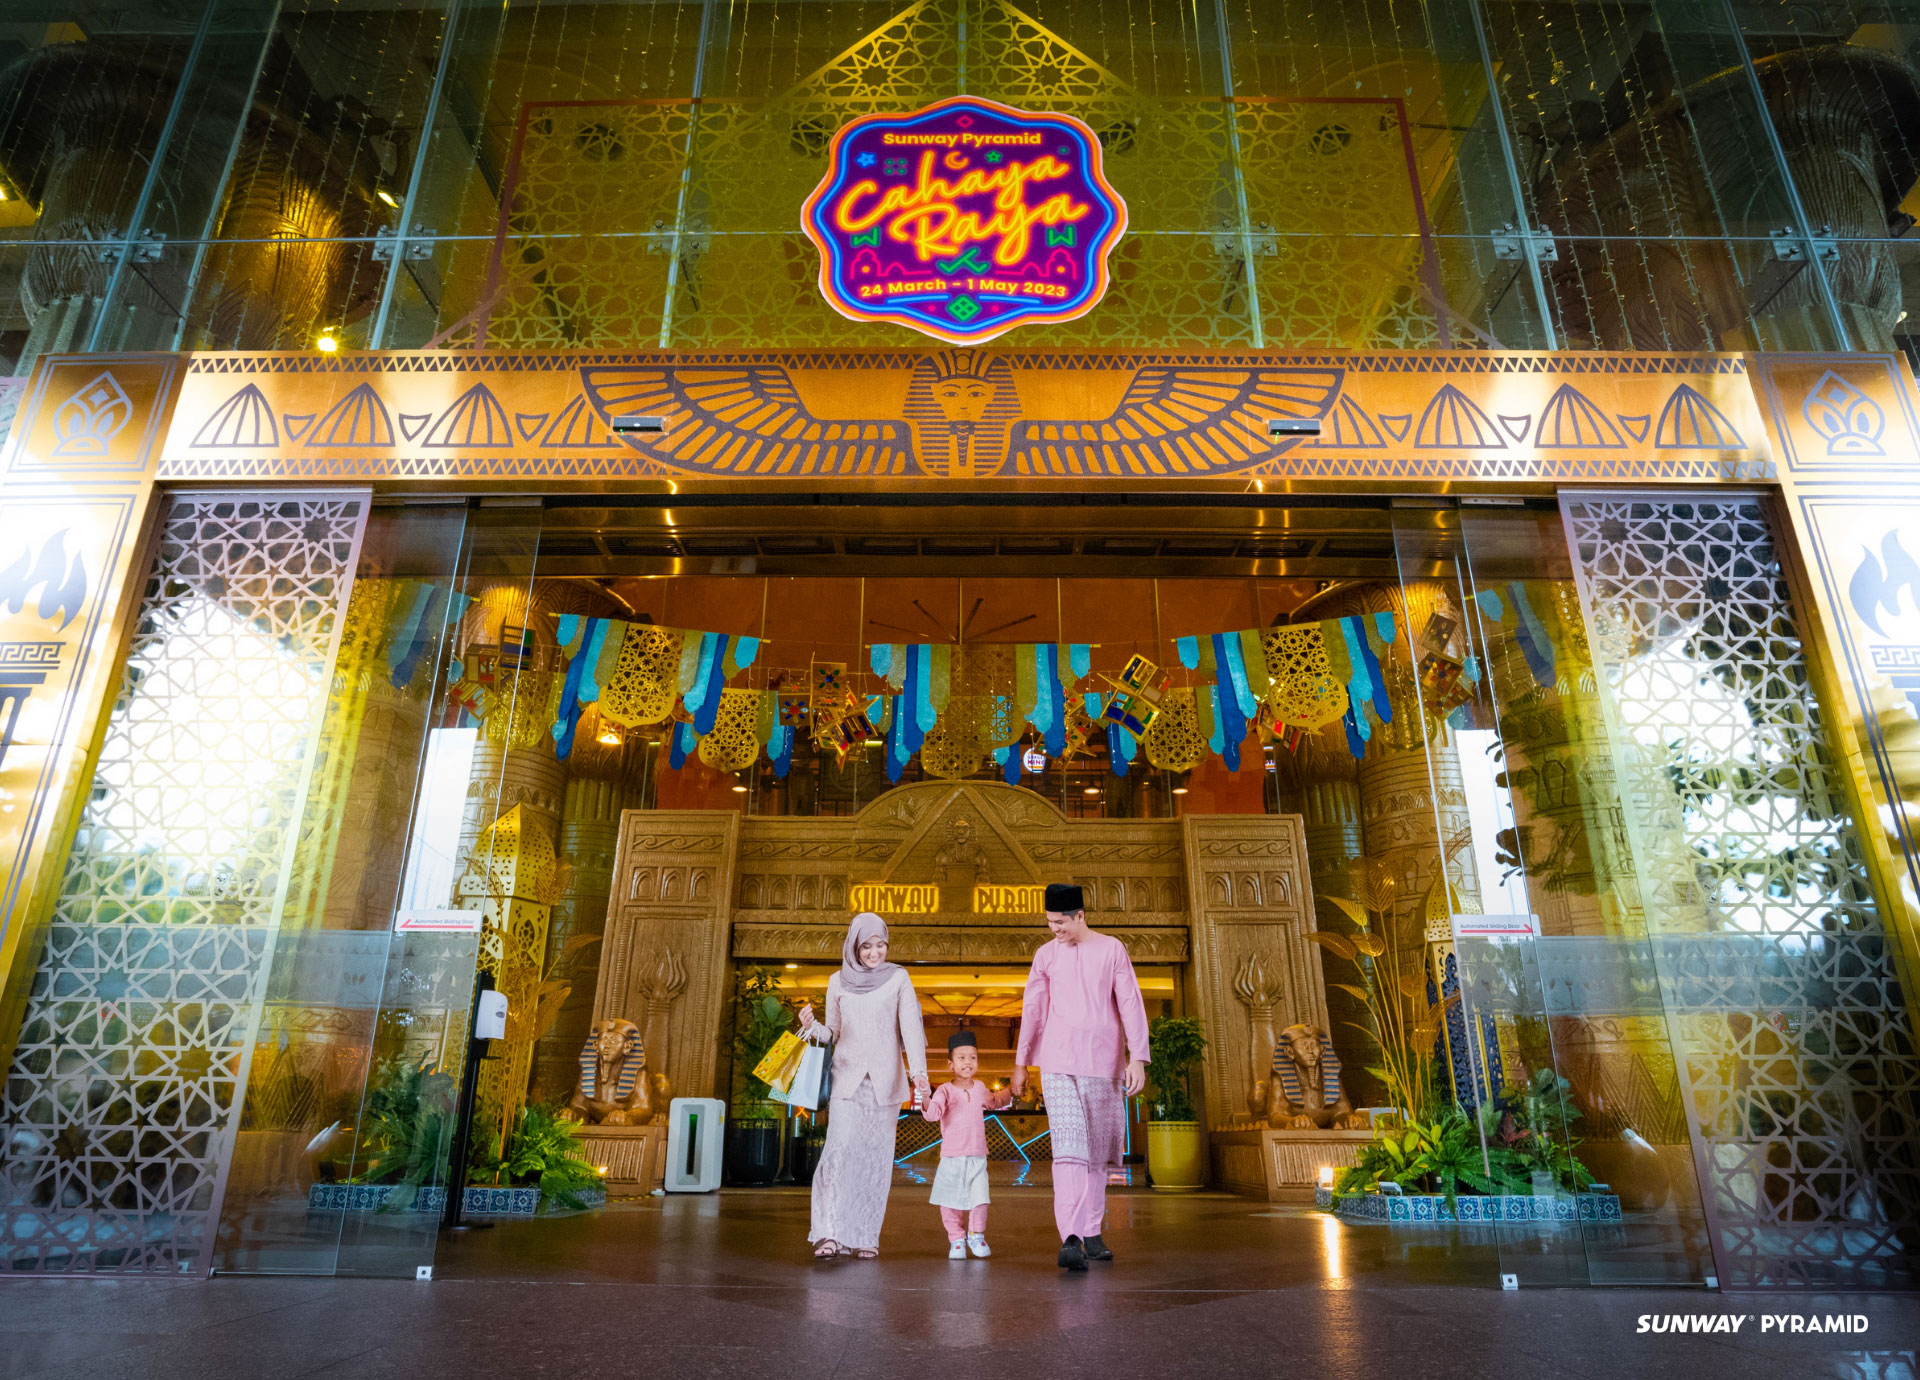 Sunway Pyramid awaits you for a meaningful celebration of the Ramadan month.